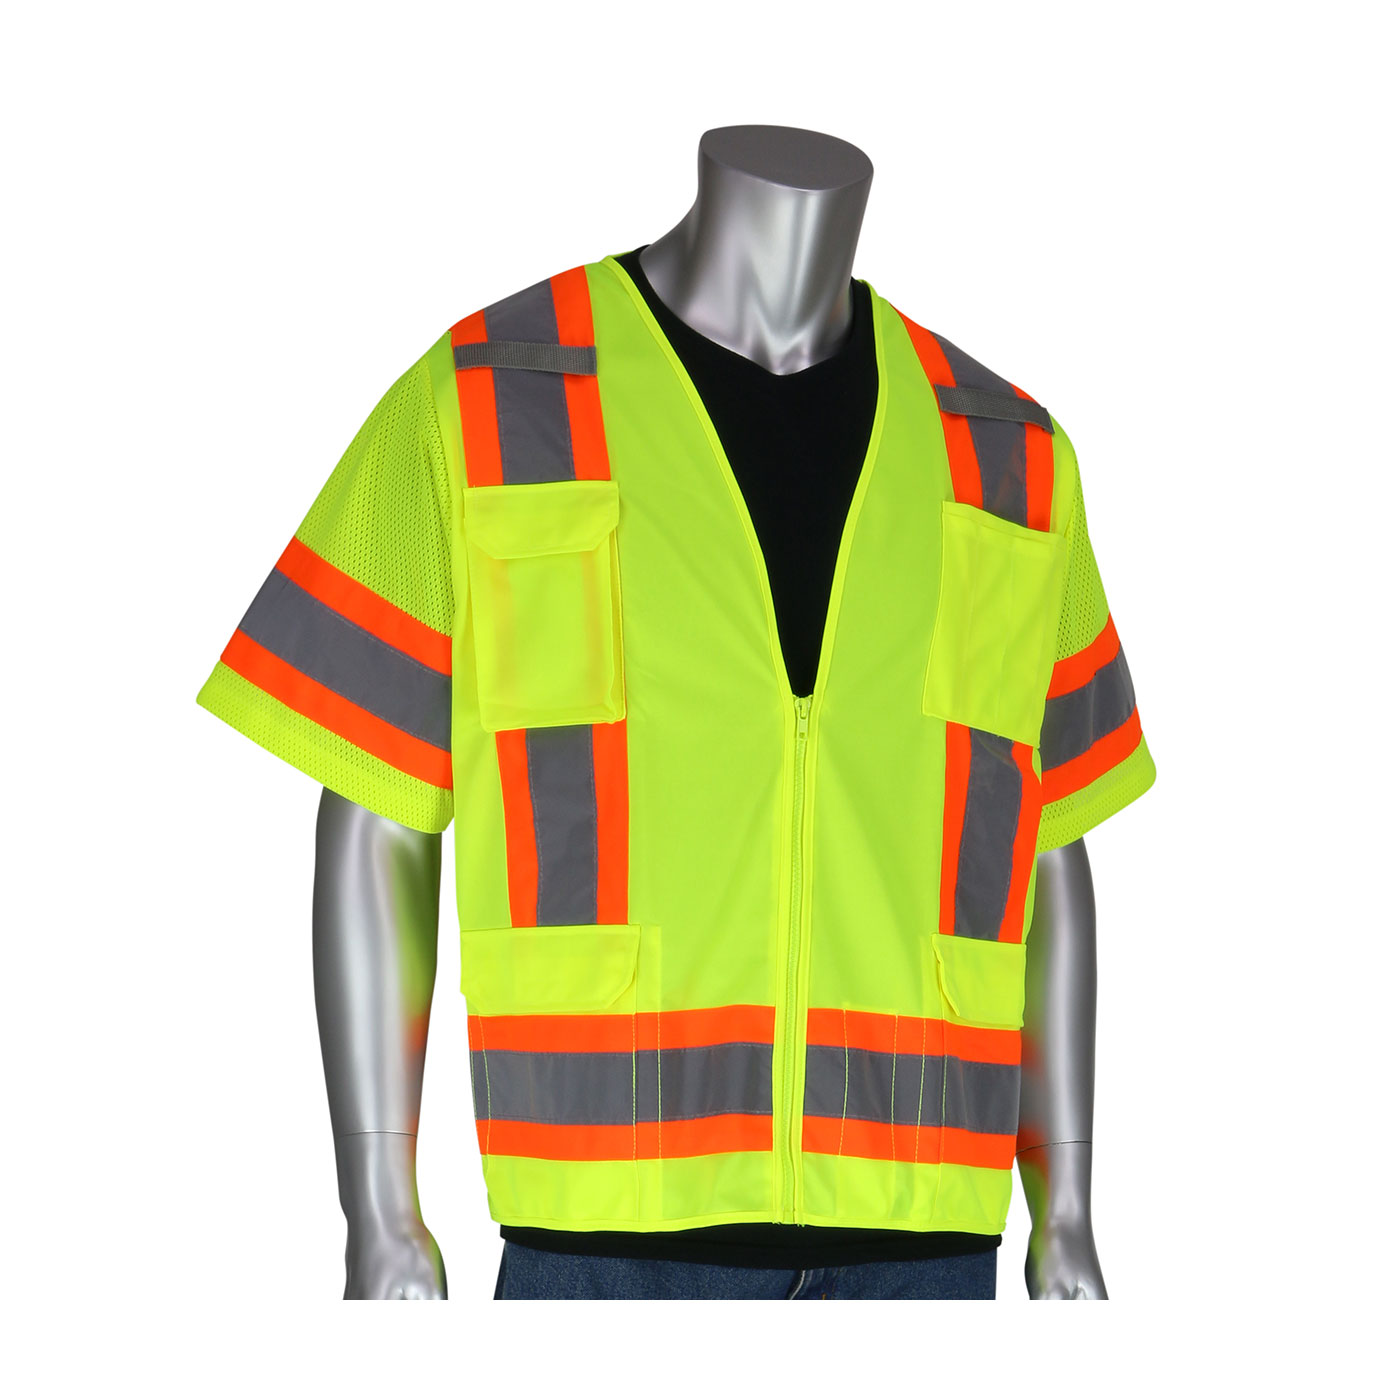 PIP 303-0500-LY/XL ANSI Type R Class 3 Two-Tone Yellow Surveyor Eleven Pocket Vest - X-Large PID-3030500LY XL